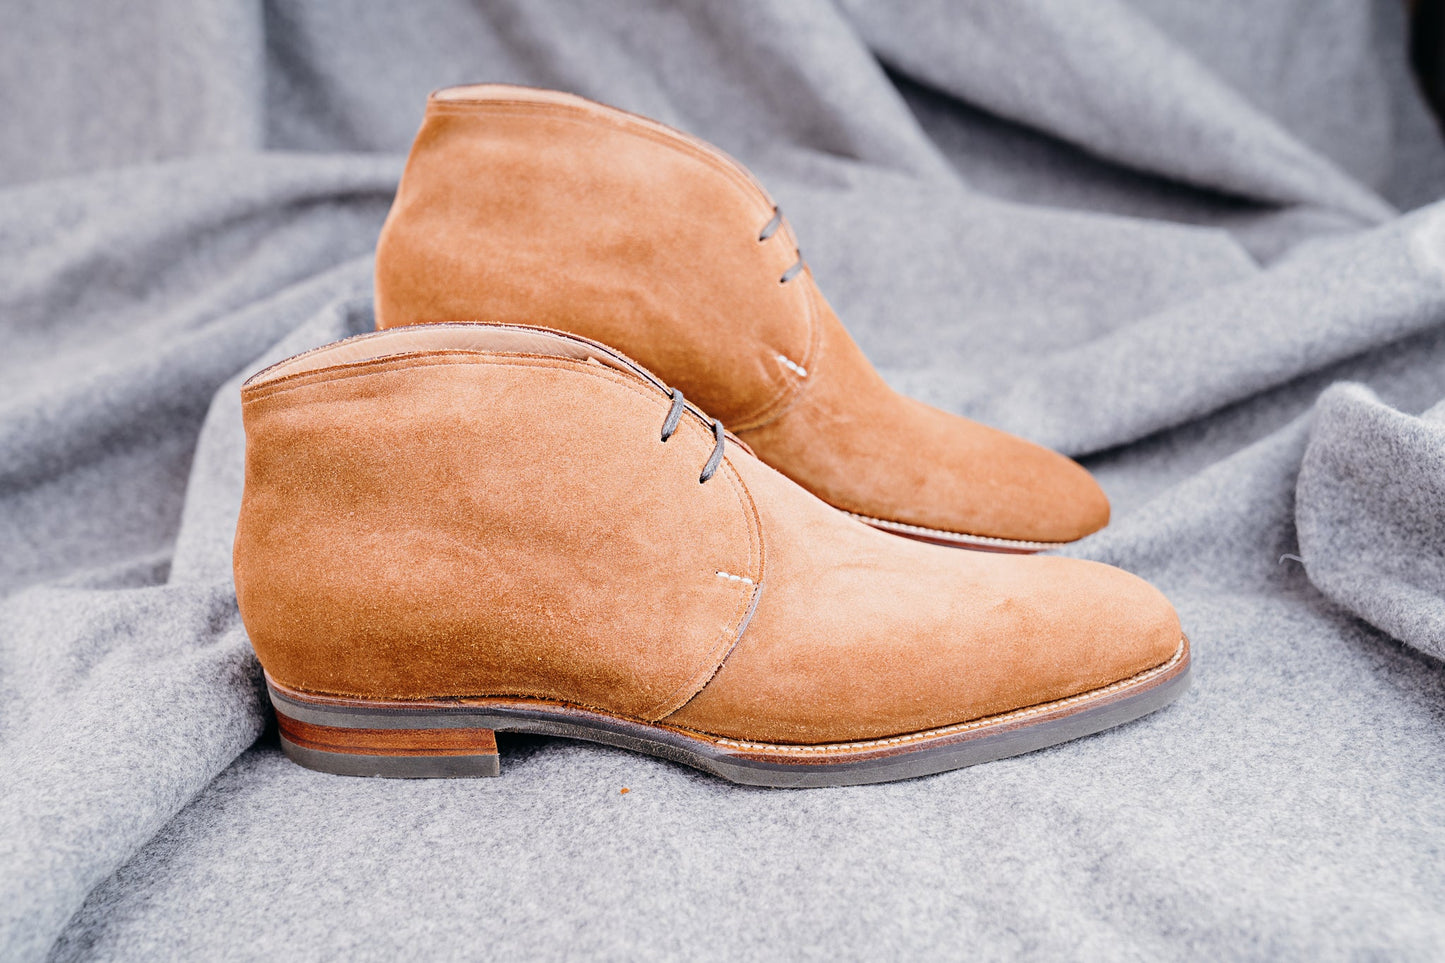 Chukka boots with two eylets, curved topline